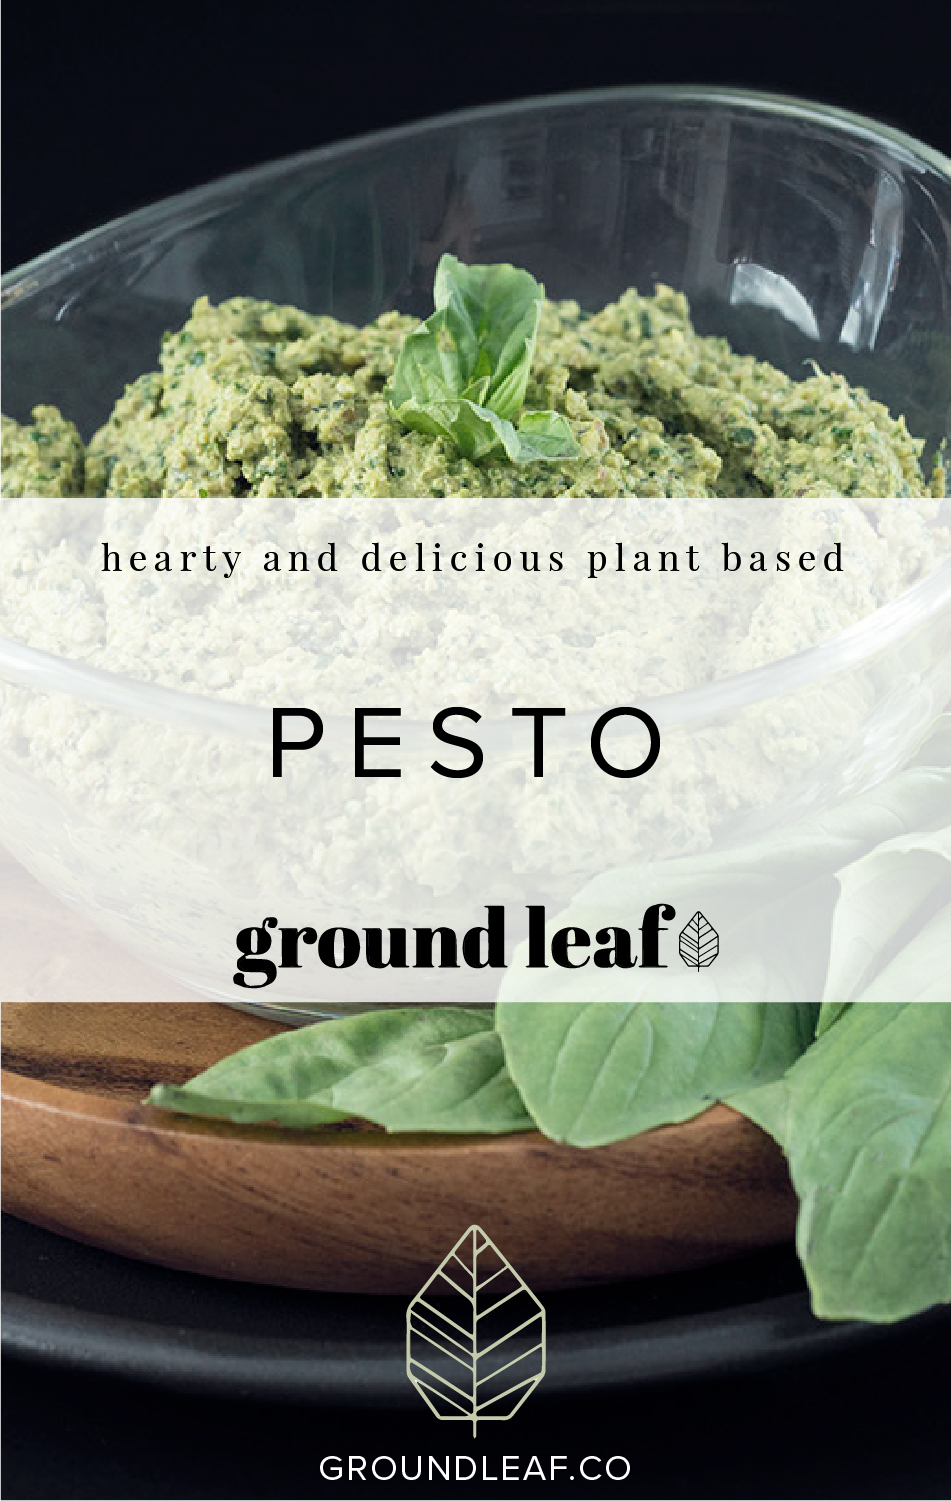 How to make oil-free vegan pesto. Video recipe included! | Groundleaf.co